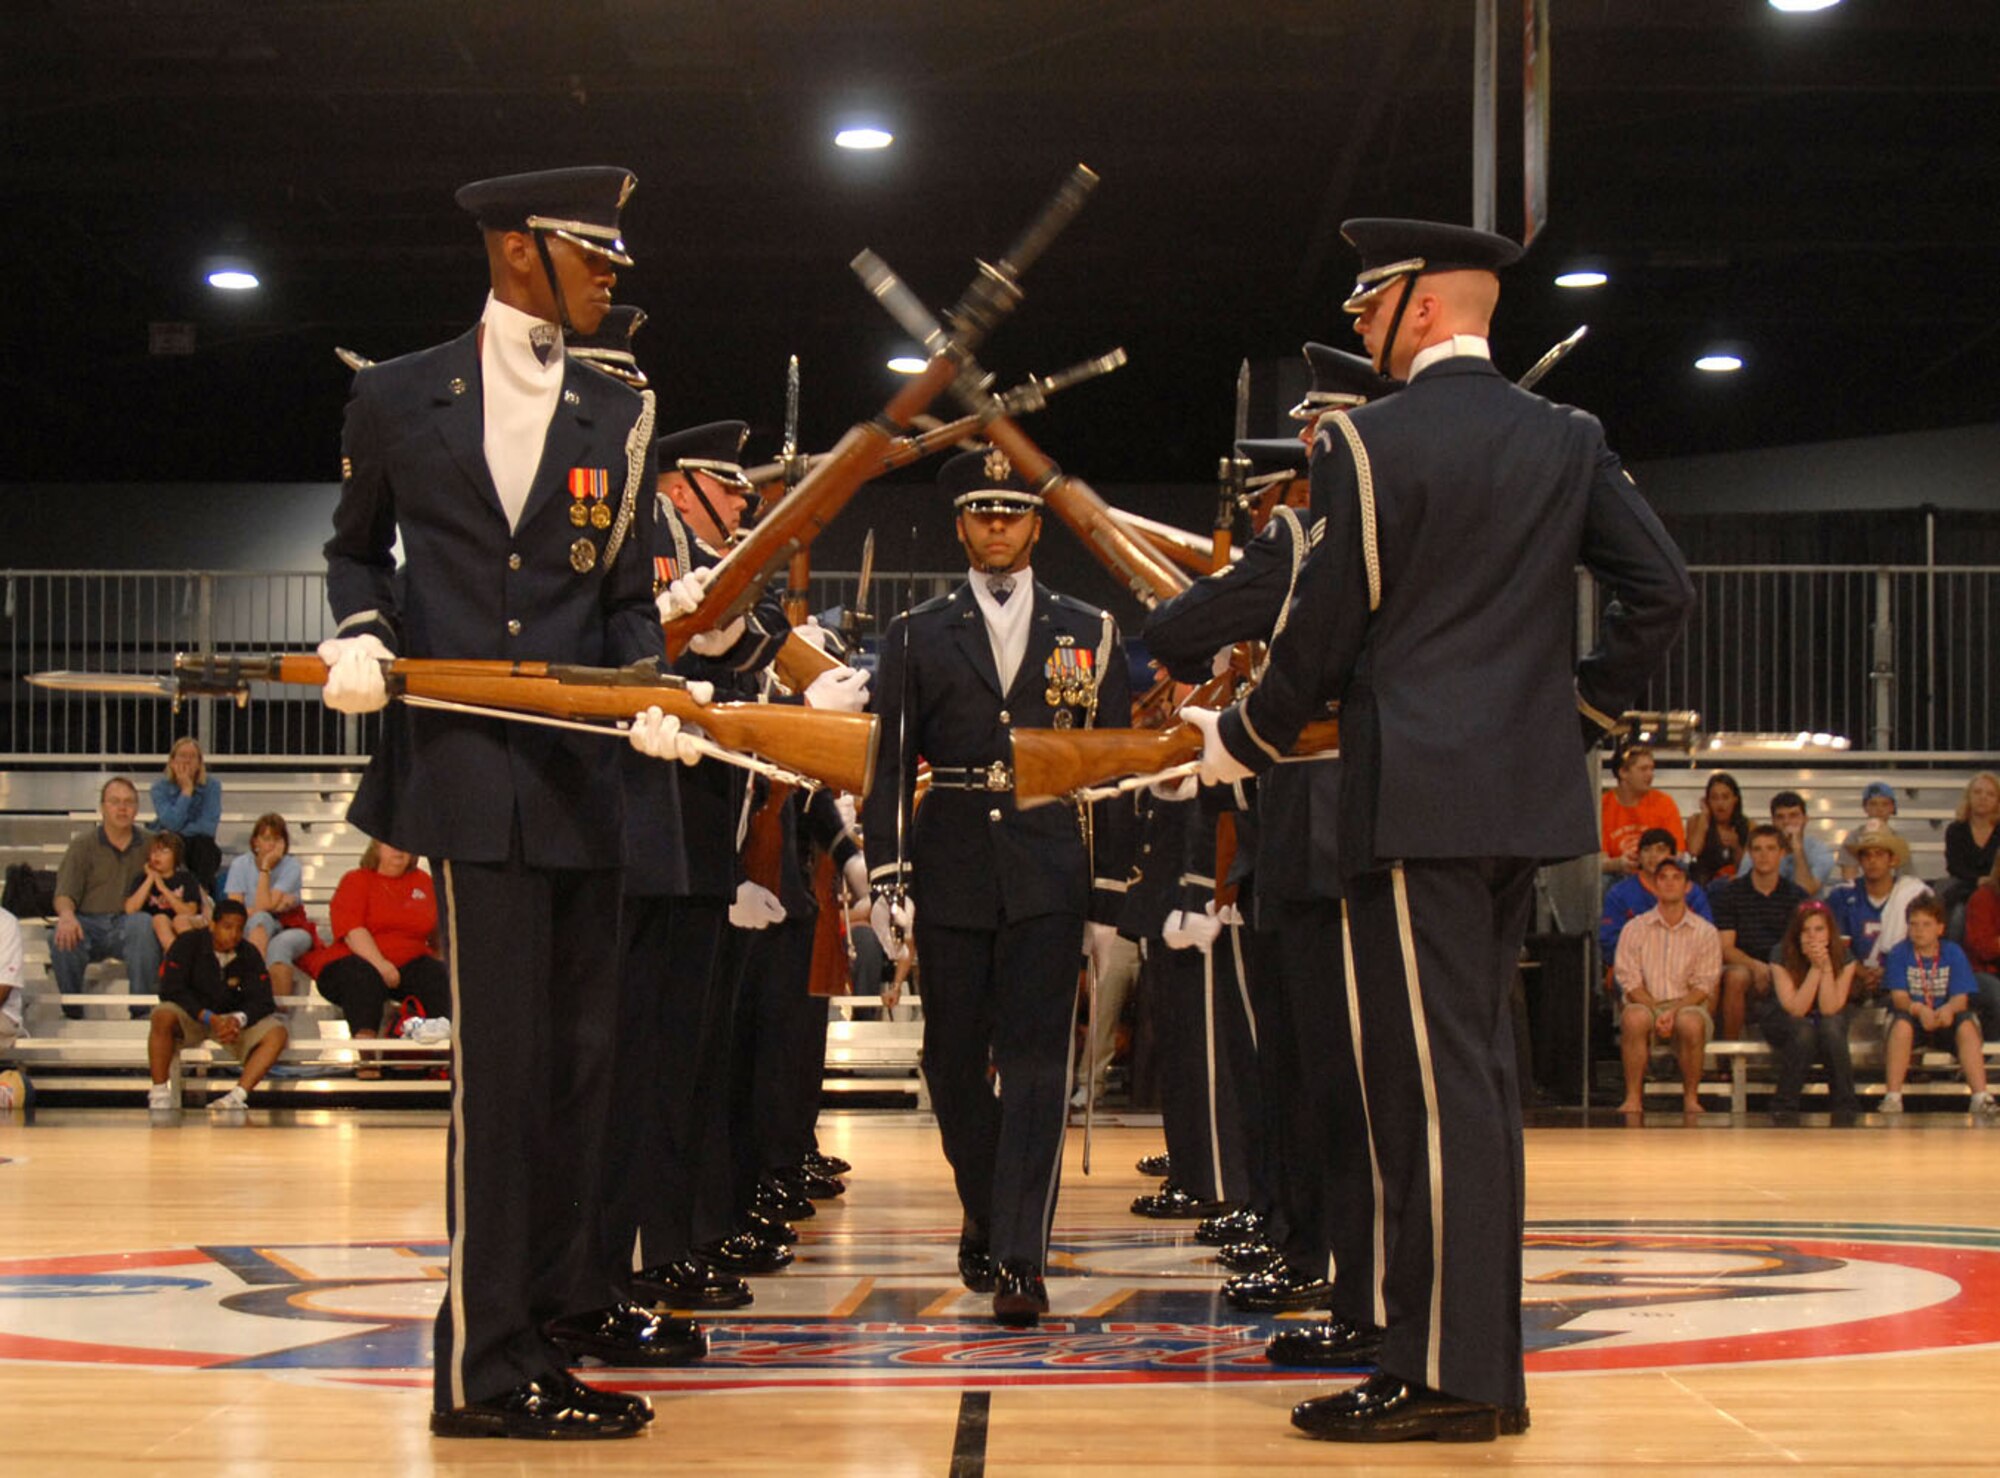 ATLANTA, Ga. -- First Lt. Joshua Hawkins walks through the spinning rifles of the Air Force Honor Guard Drill Team during their performance at Hoop City, an event surrounding the NCAA Final Four, April 1.  The Air Force Honor Guard Drill Team was invited to perform for various ceremonies associated with the NCAA Final Four events March 31 - April 2, including the opening ceremonies at Centennial Olympic Park March 31.